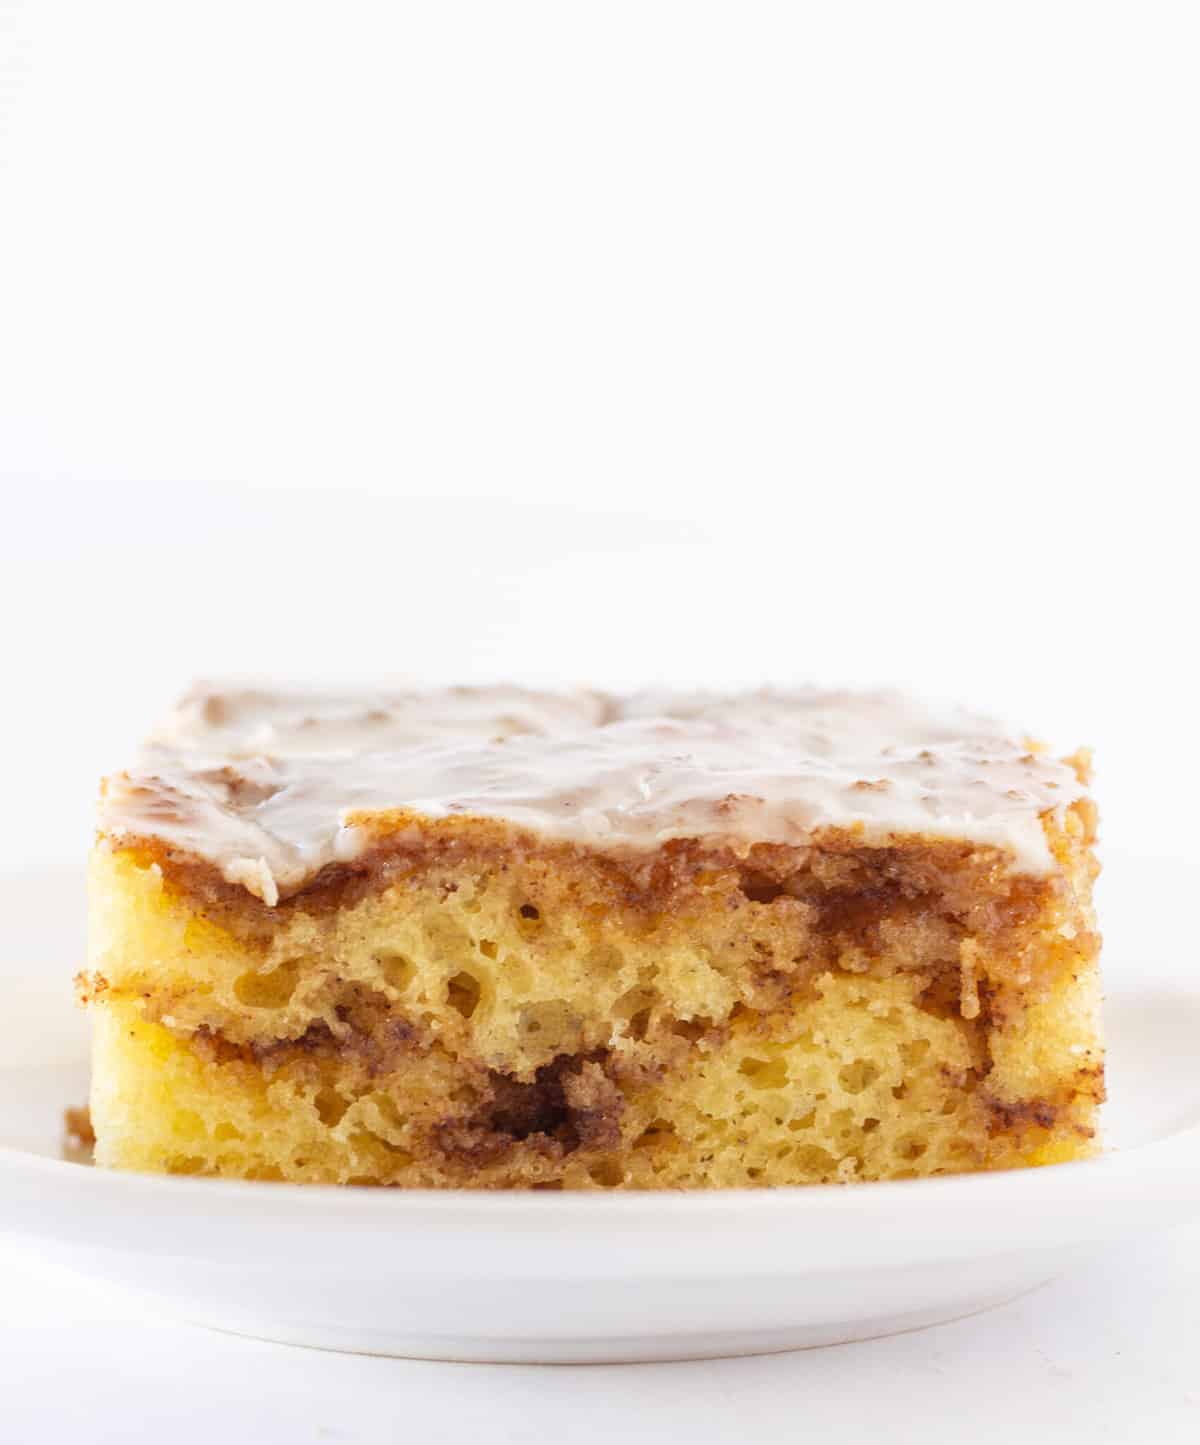 Easy Cinnamon Roll Cake Recipe Made with a Cake Mix by top US food blogger, Practically Homemade